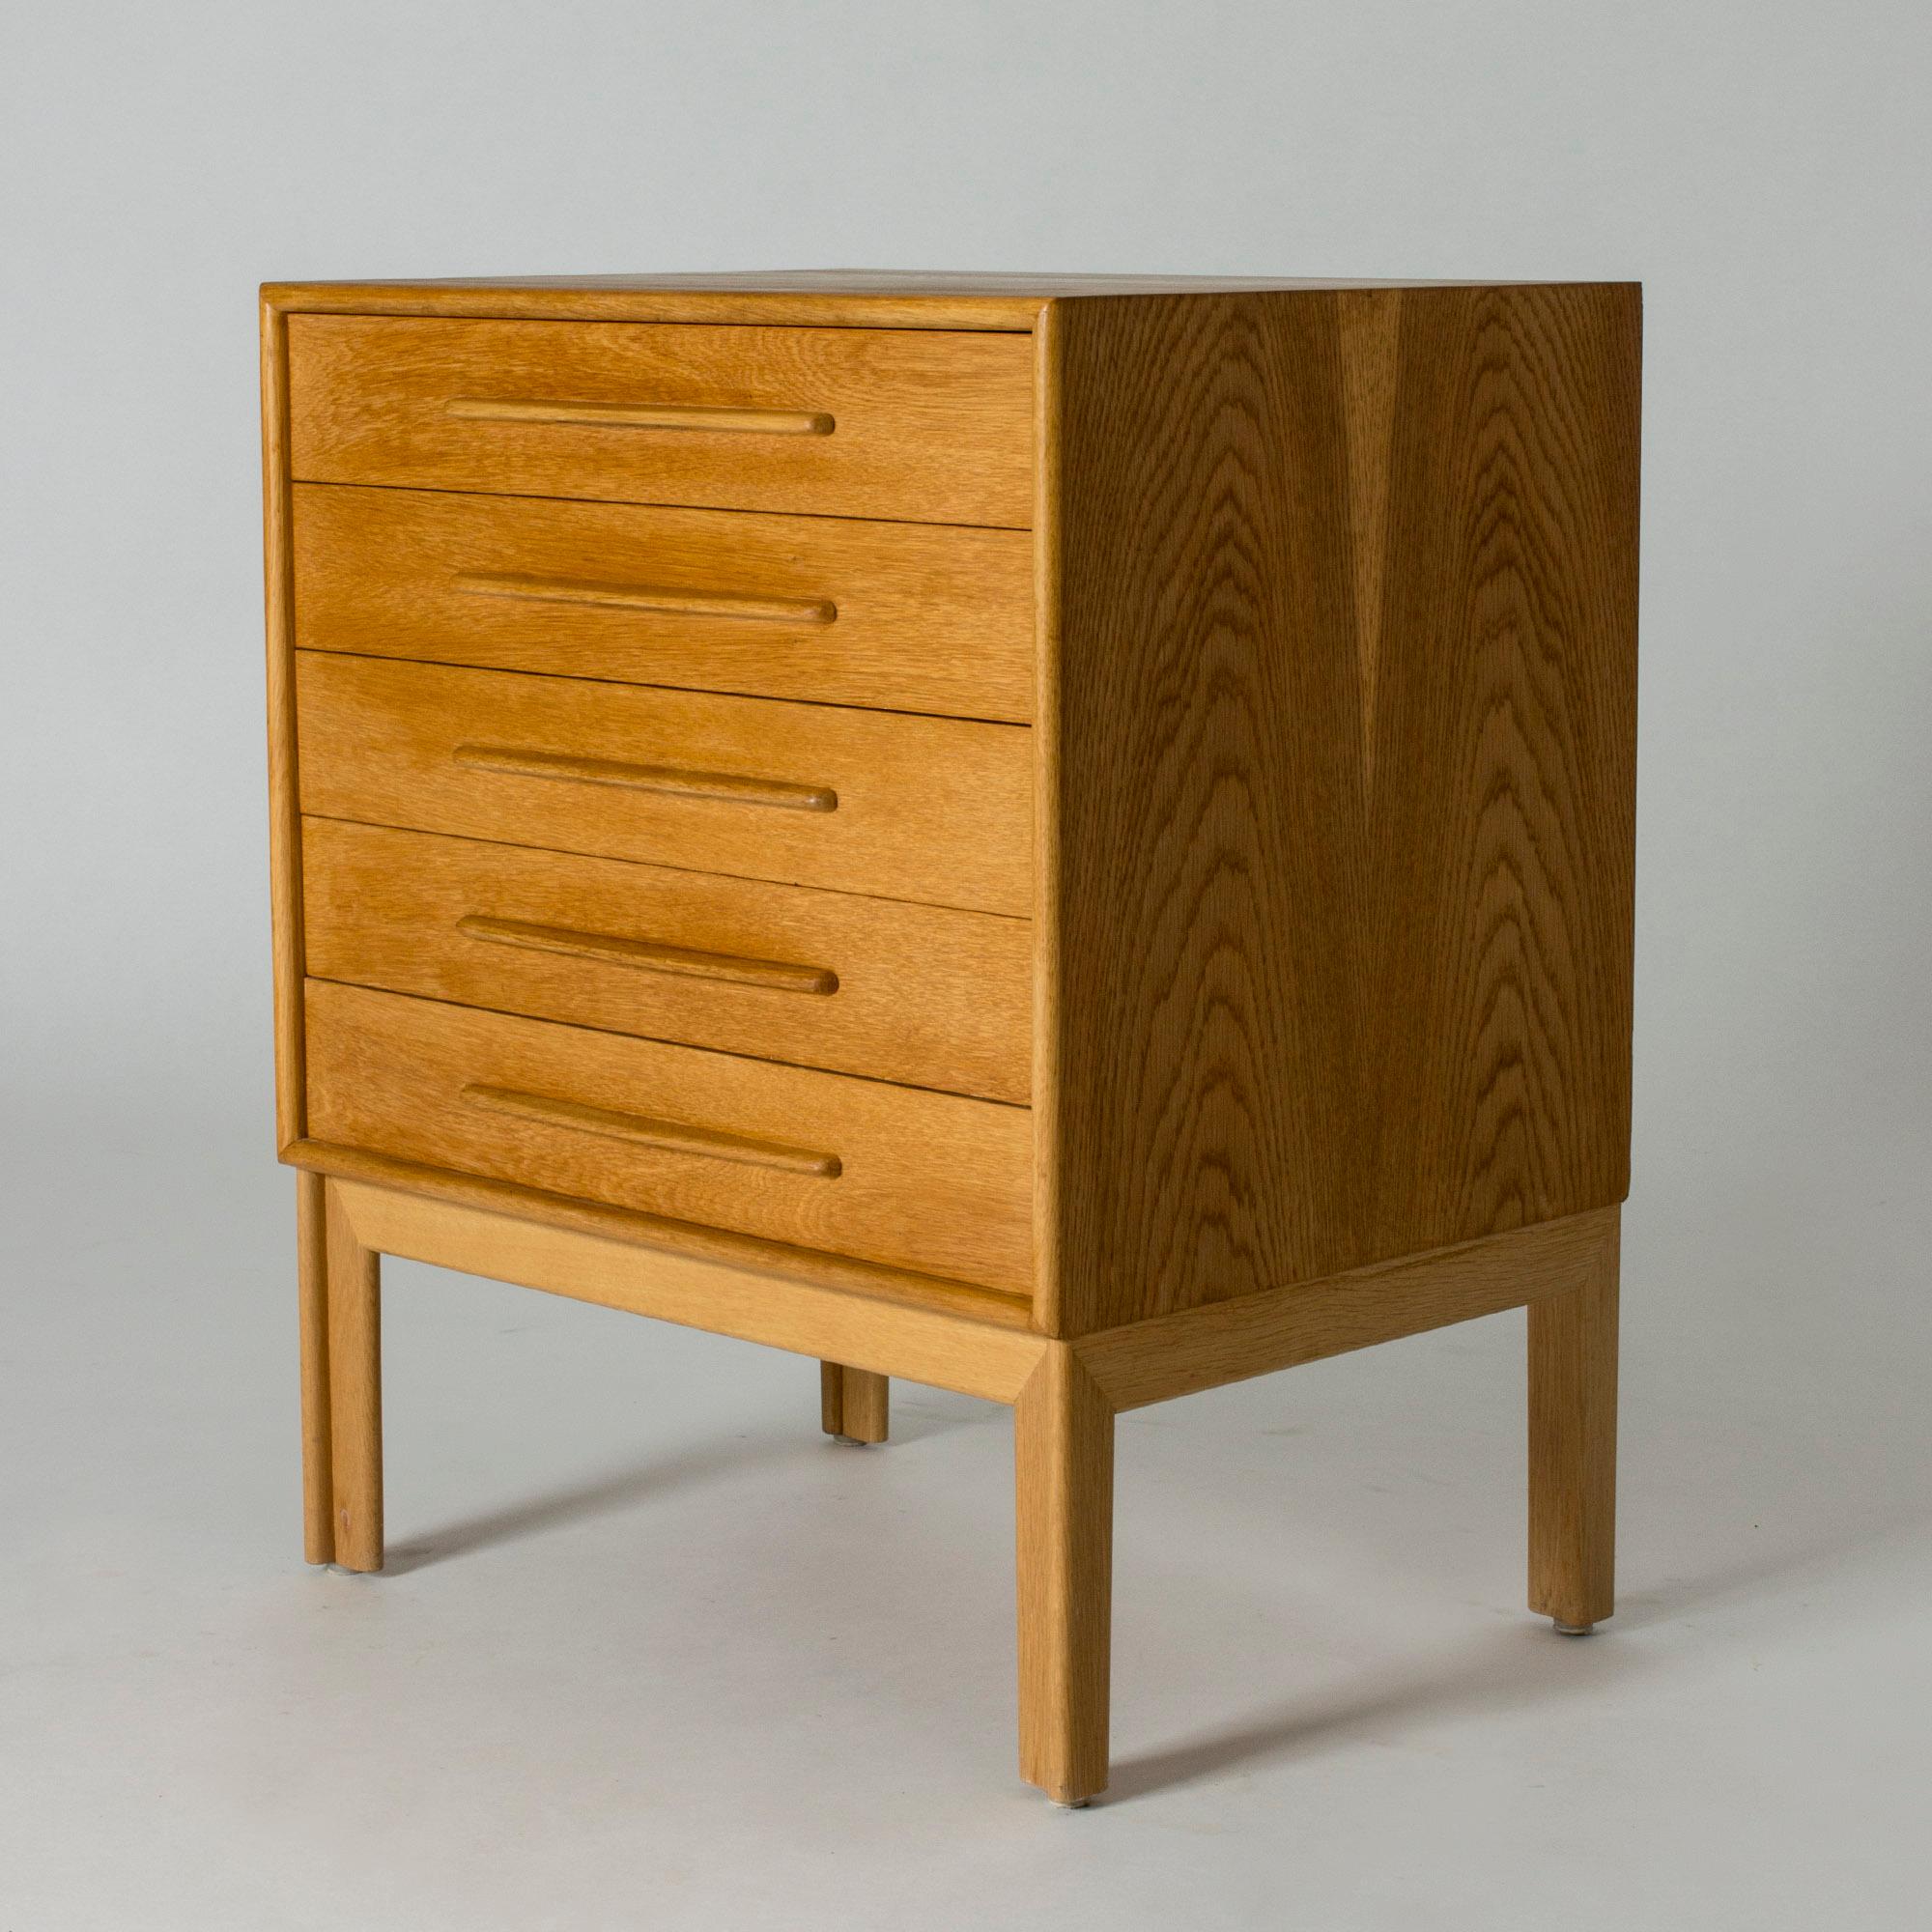 Chest of drawers by Alf Svensson, made from oak. Long, cool sculpted handles, neat size.